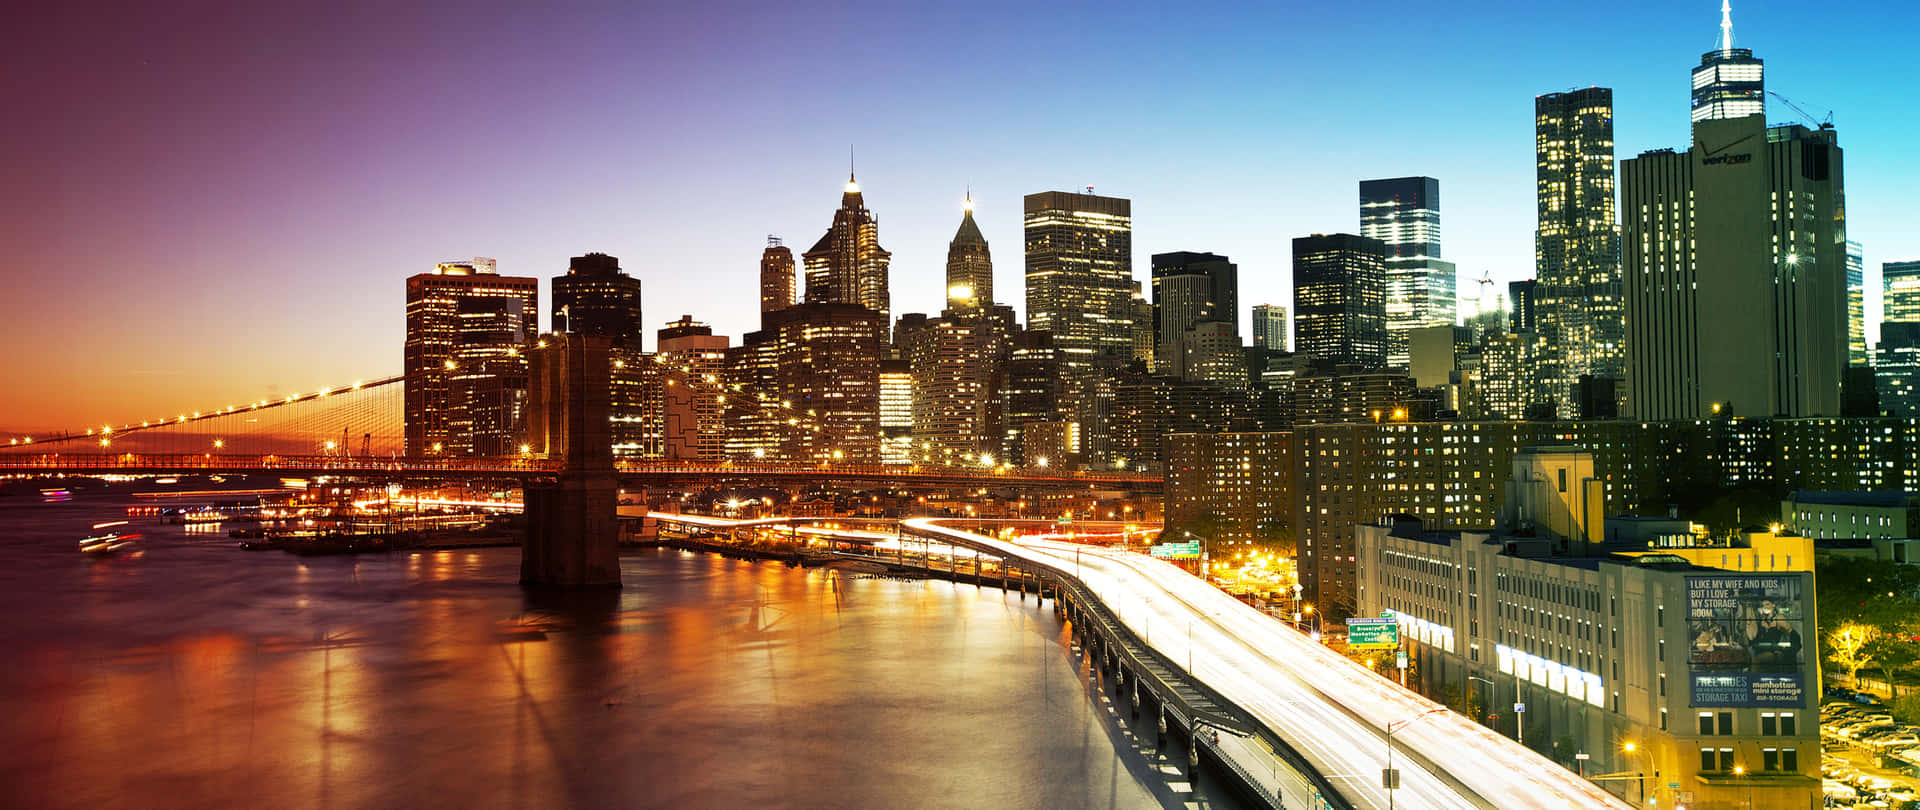 A Breathtaking View Of The New York City Skyline In Stunning 4k Ultra Hd. Wallpaper